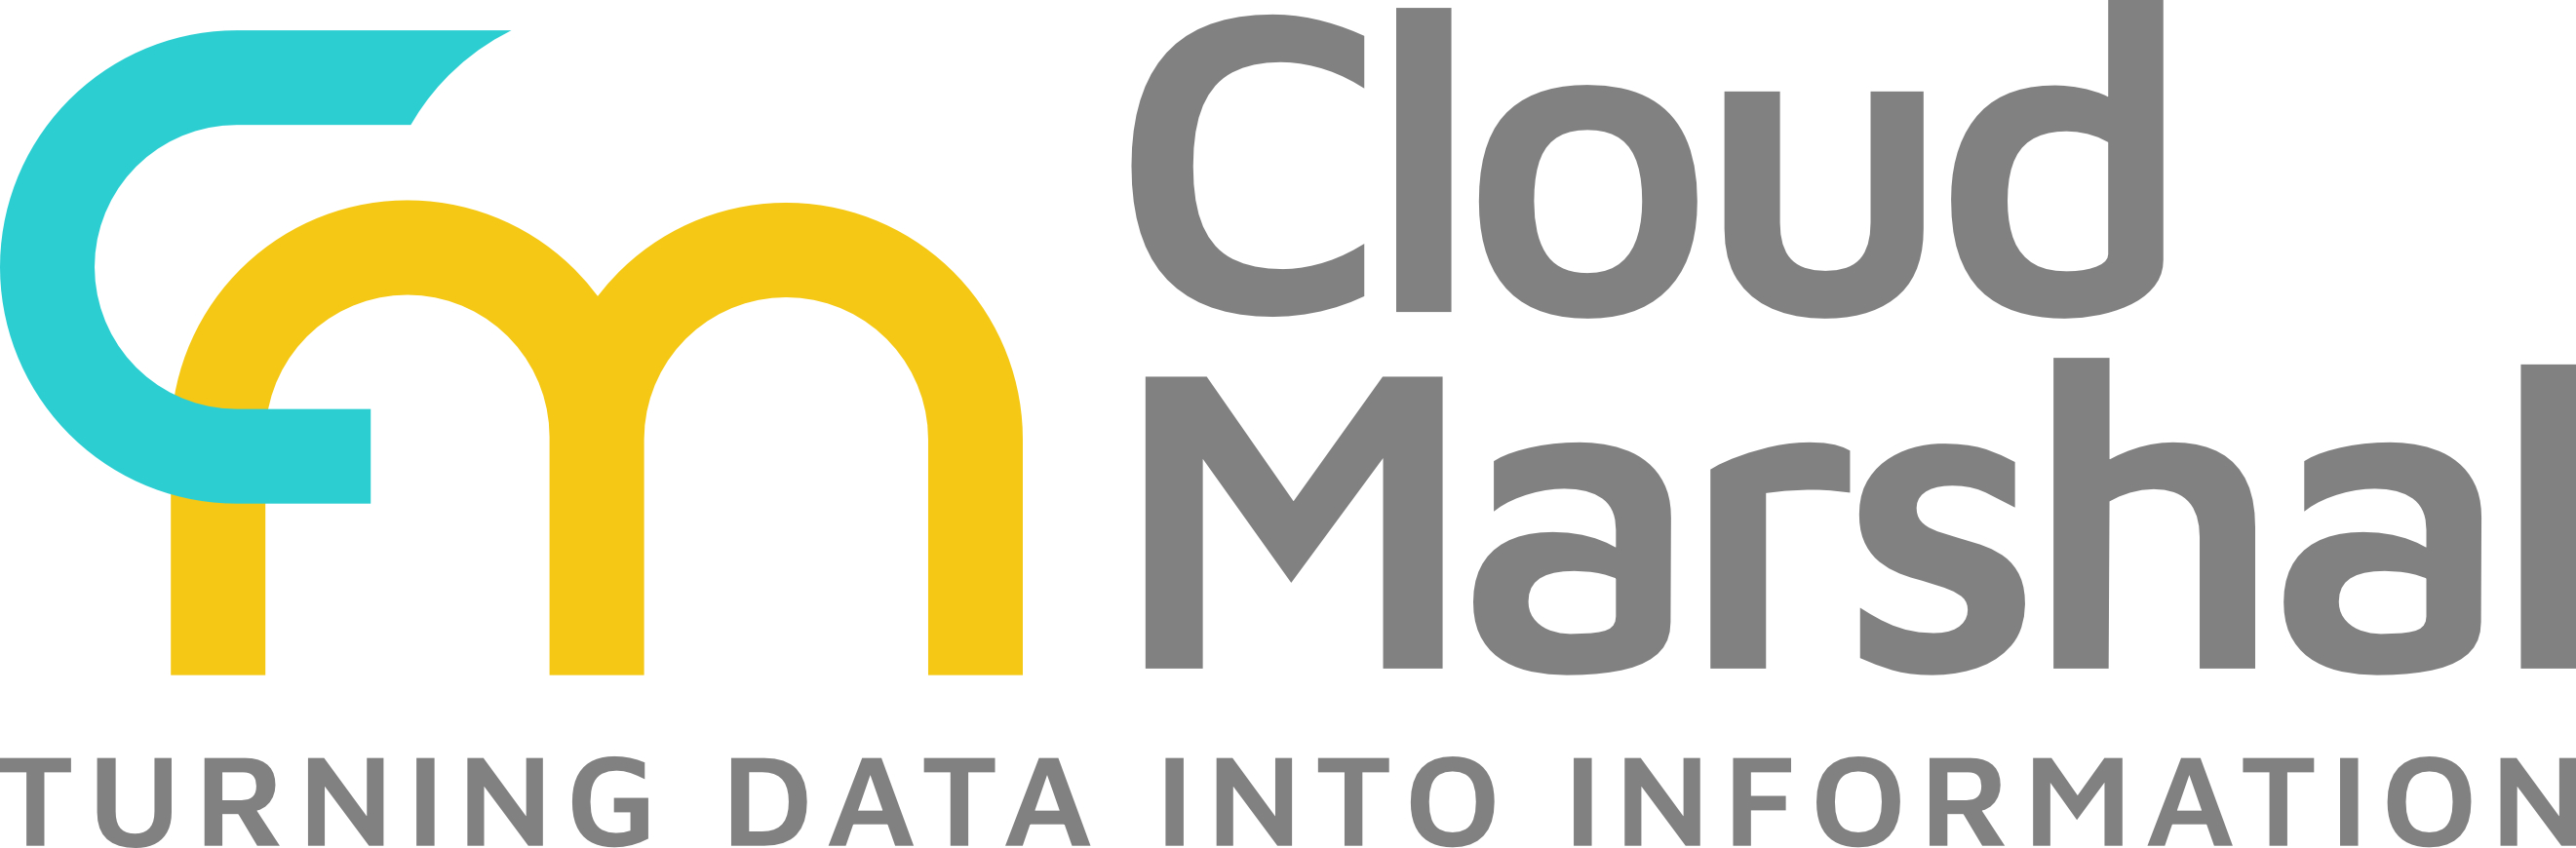 CloudMarshal Enables SMEs Tighter Control Of Cloud Operations  